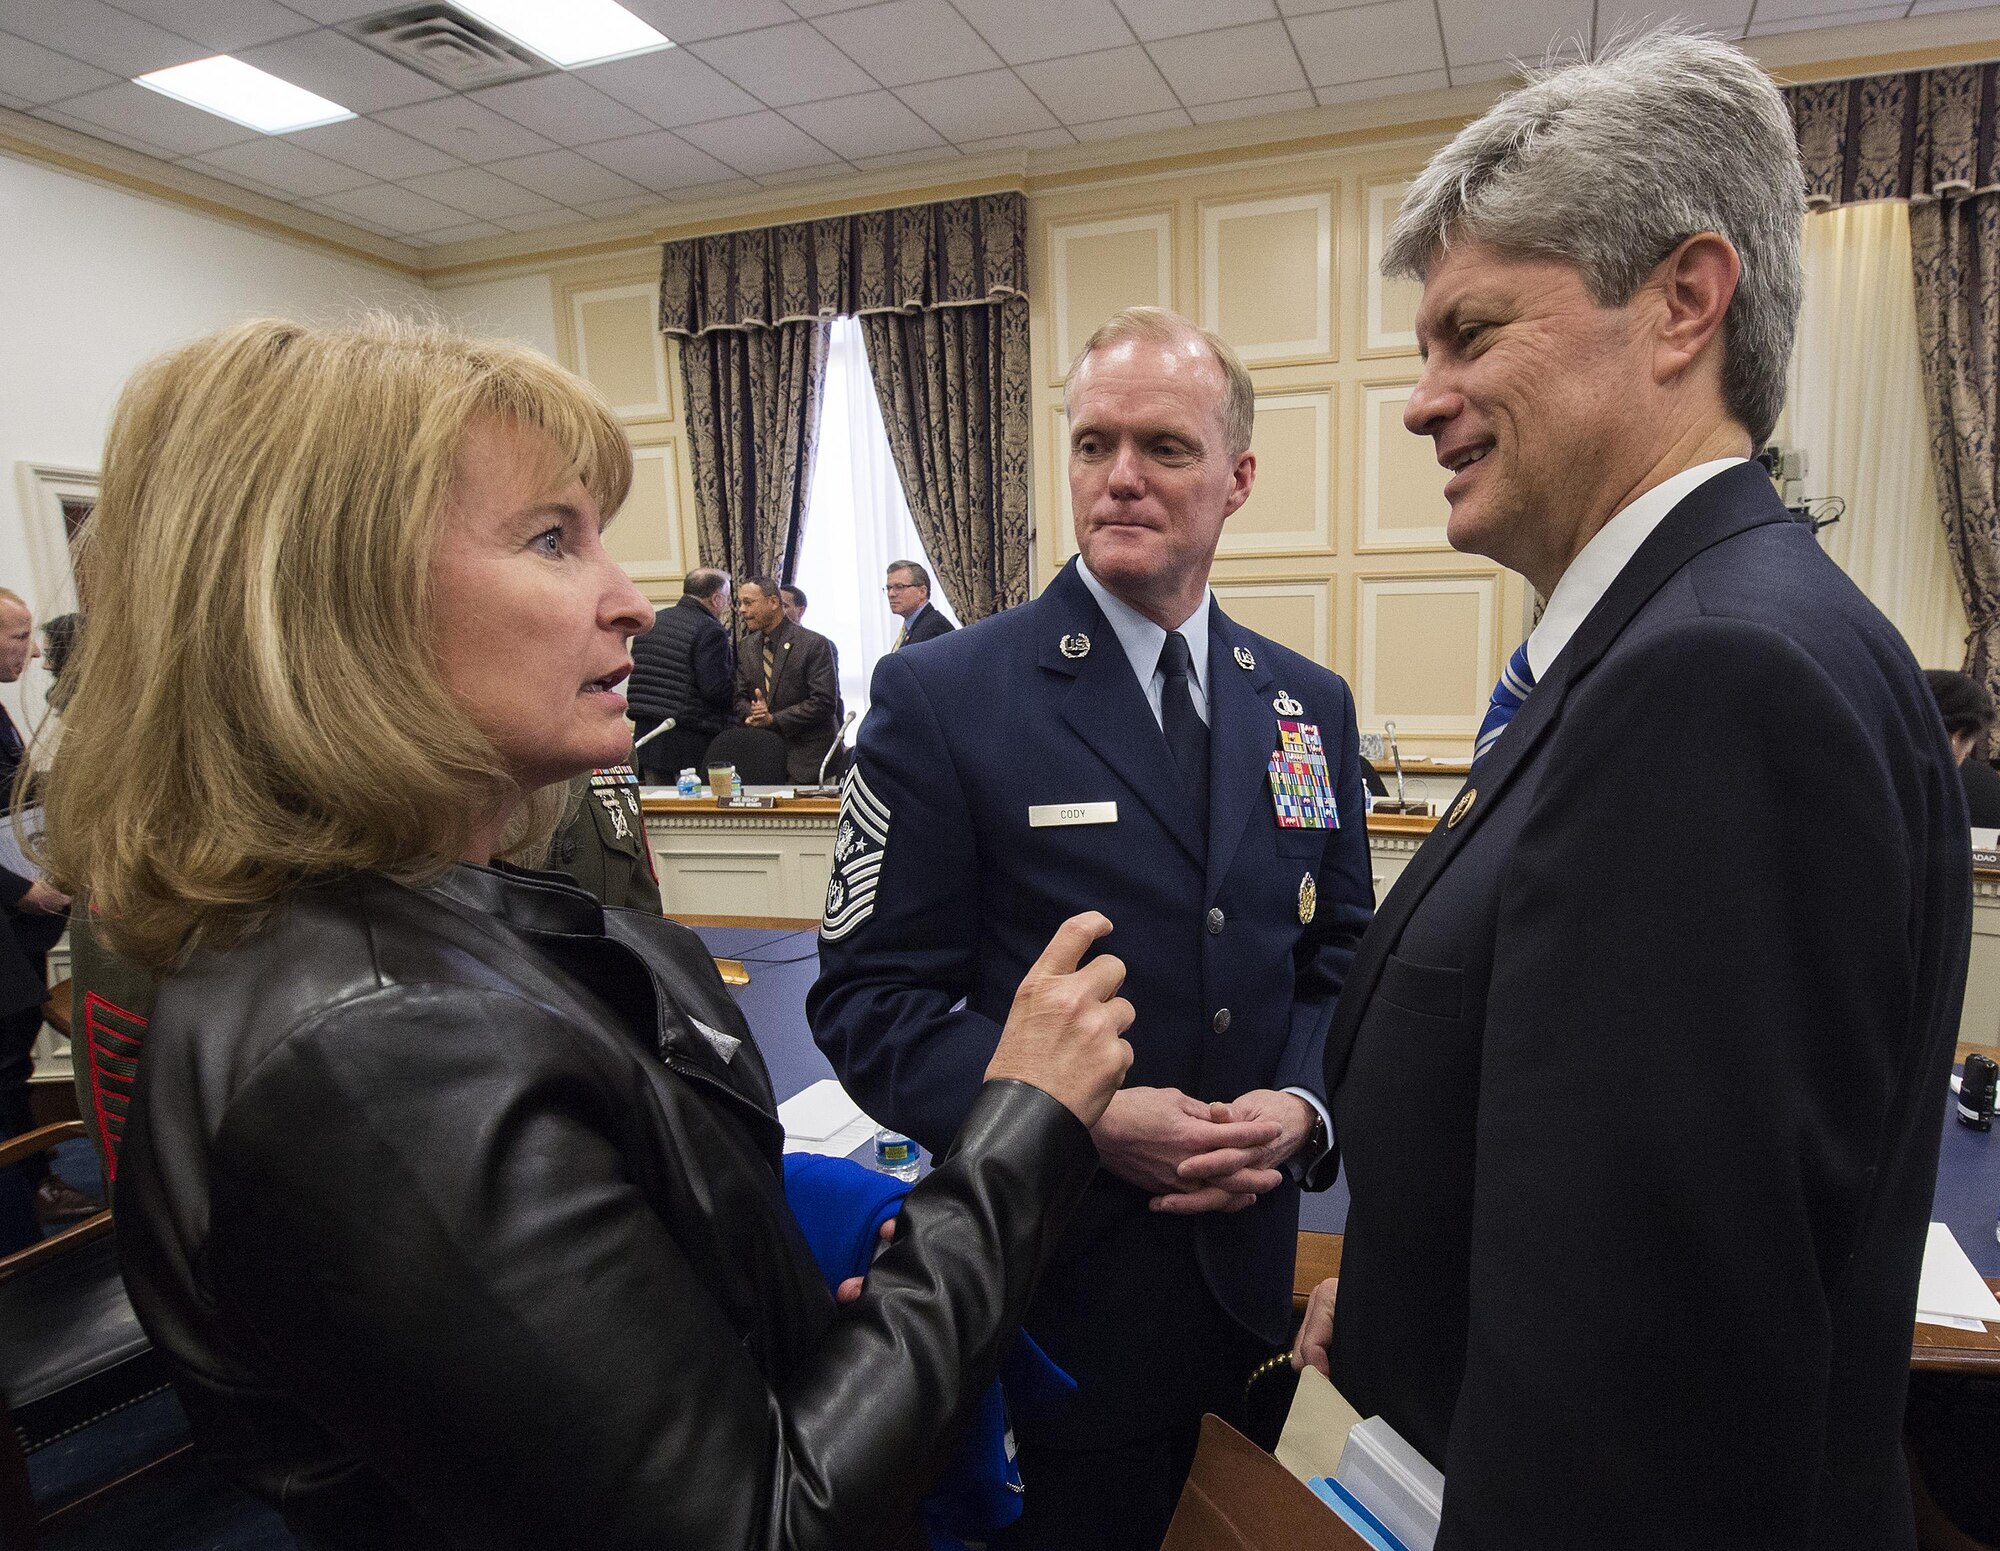 Chief Master Sgt. of the Air Force James A. Cody, and his wife Athena Cody, talk with Rep. Jeff Fortenberry(R-Neb.) following a hearing of the House Appropriations Committee’s Subcommittee on Military Construction and Veterans Affairs Feb. 26, 2016, in Washington, D.C. Fortenberry is vice chair of the subcommittee. The oversight hearing was being held to learn about quality of life in the military concerns from each of the service's senior most enlisted members. During his opening statement Cody stressed the cumulative impacts of sequestered and reduced budgets on the compensation and quality of life of Airmen and their families. Cody stressed that the Airmen who serve today do so freely, proudly and voluntarily because they believe in what America stands for and are ready to defend its cause. He added that our nation must honor that commitment by providing for them and their families. (U.S. Air Force photo/Jim Varhegyi)